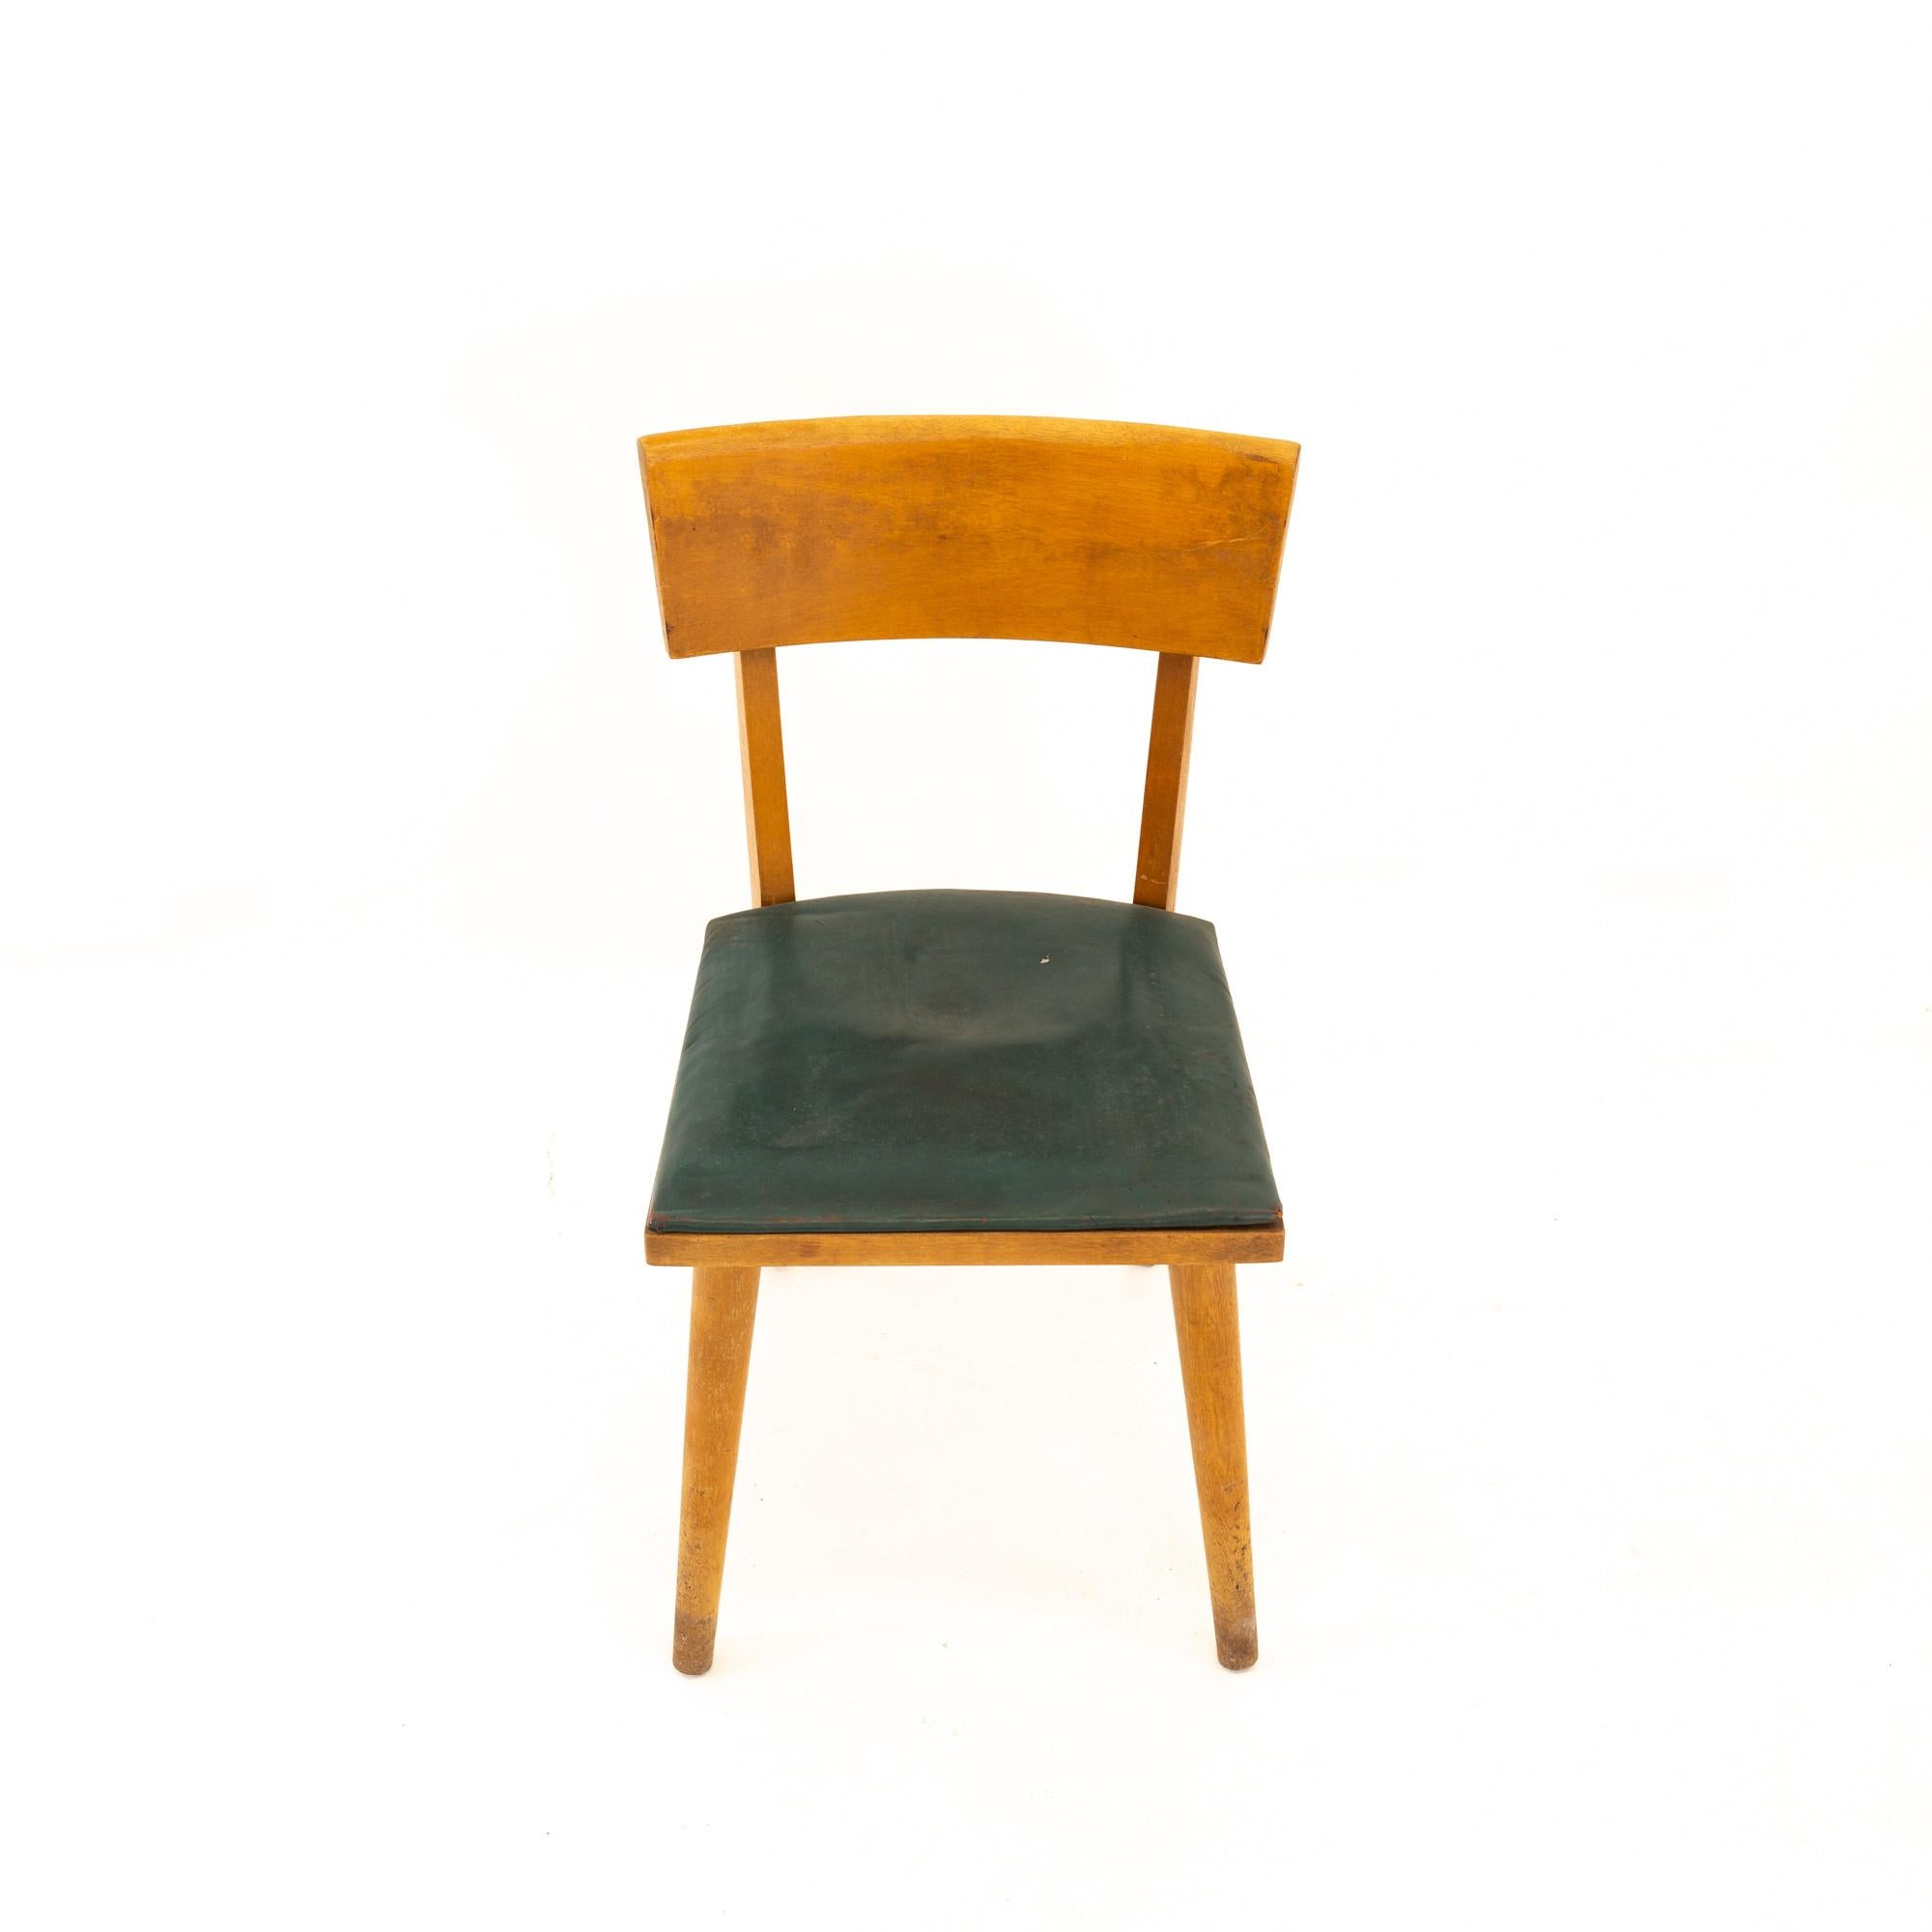 Russel Wright for Conant Ball Young American Modern Mid Century Dining Chair In Good Condition For Sale In Countryside, IL